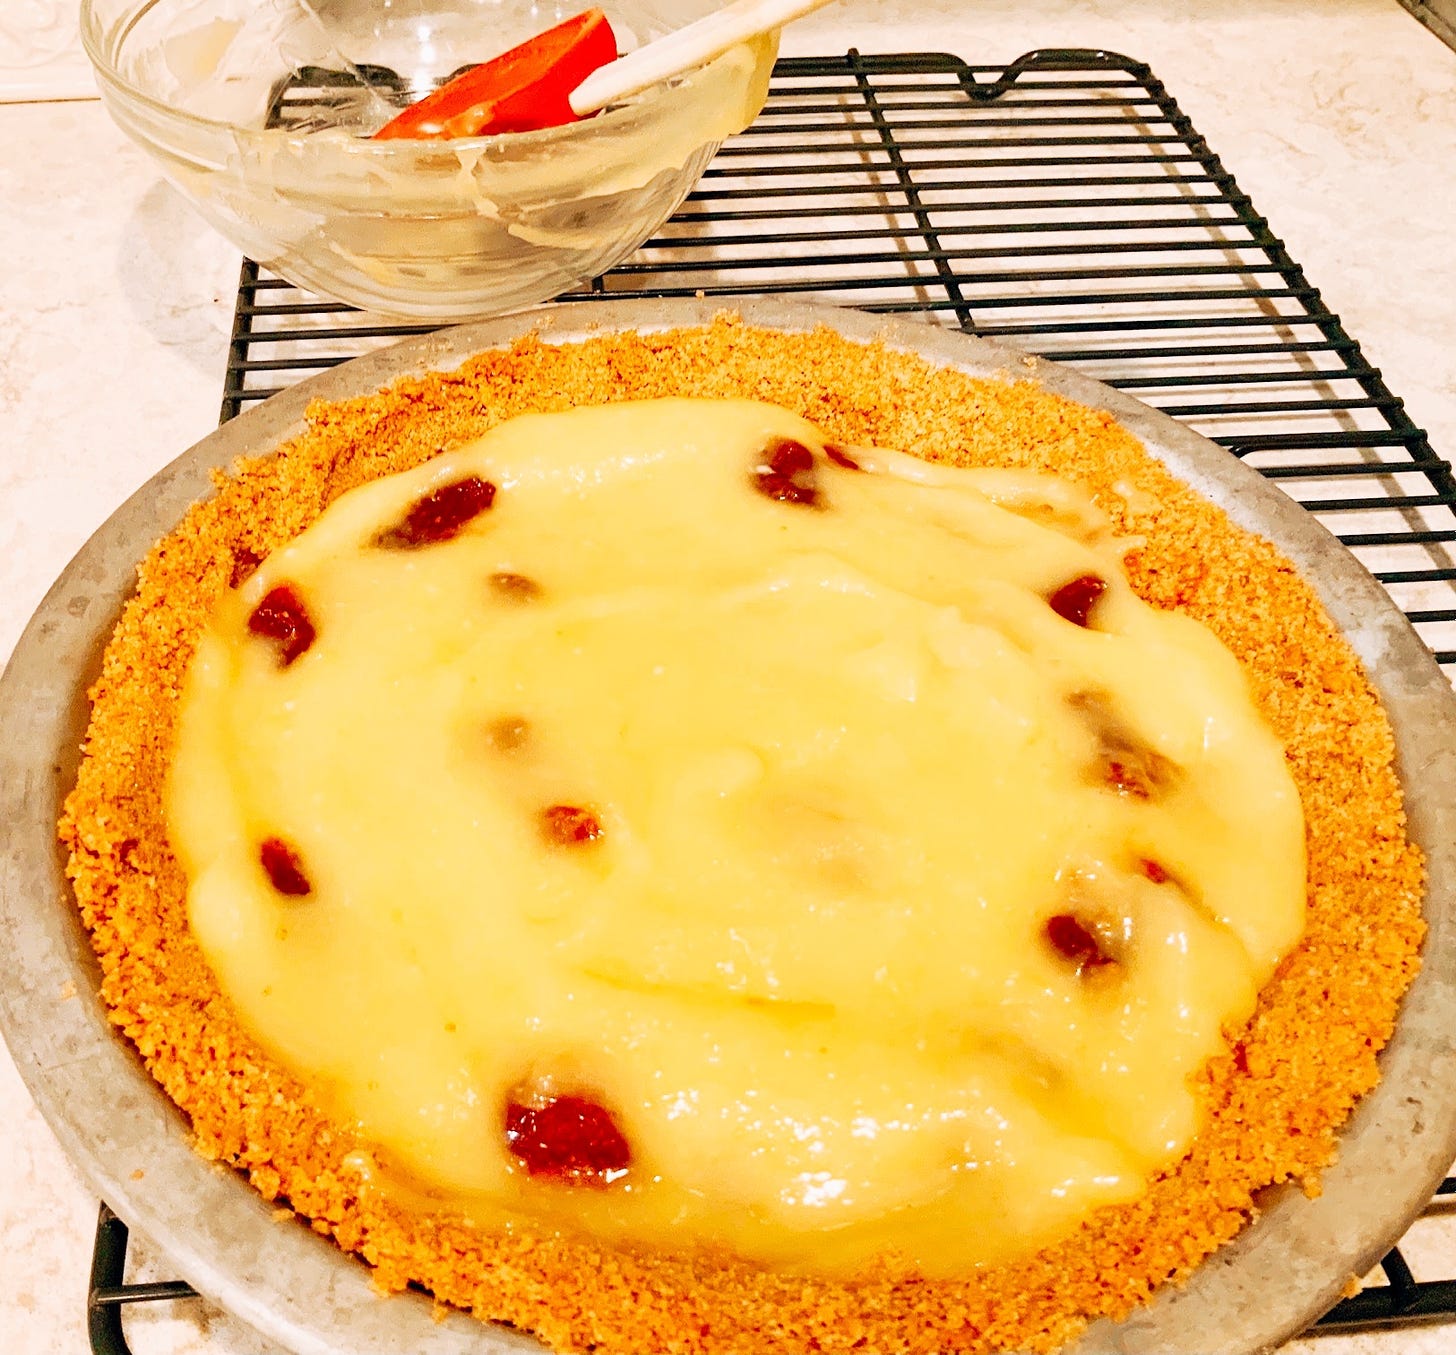 A lemon curd pie in a graham cracker crust is dotted with berry preserves. It sits on a wire rack. Behind it, a glass bowl that previously held the lemon curd now only hold a red spatula.